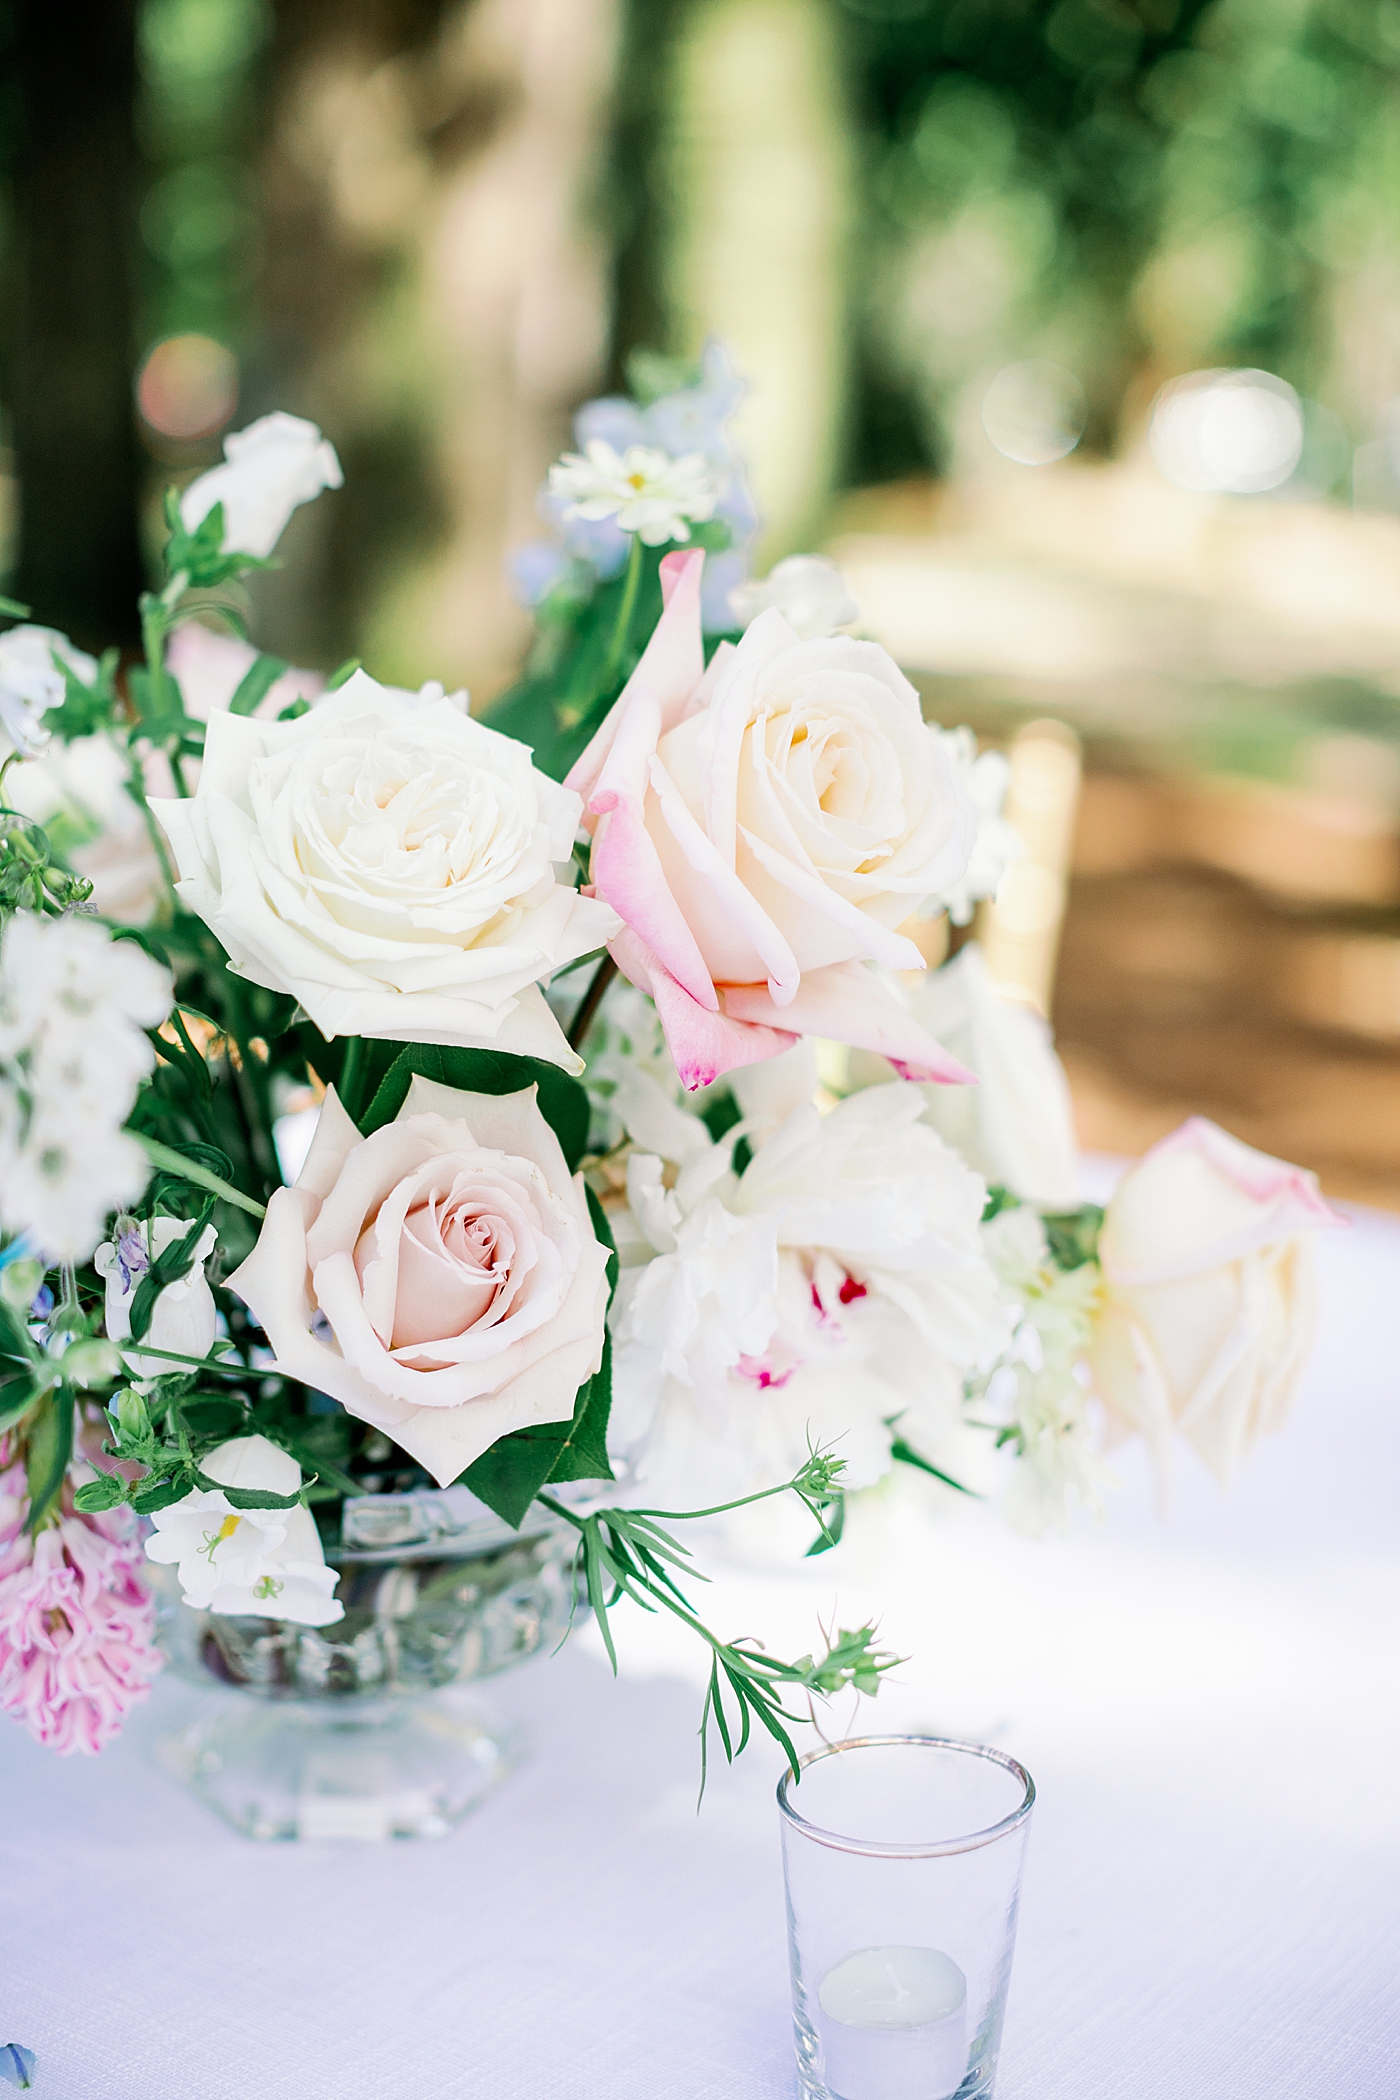 Bright spring wedding flowers | Images by Annie Laura Photography